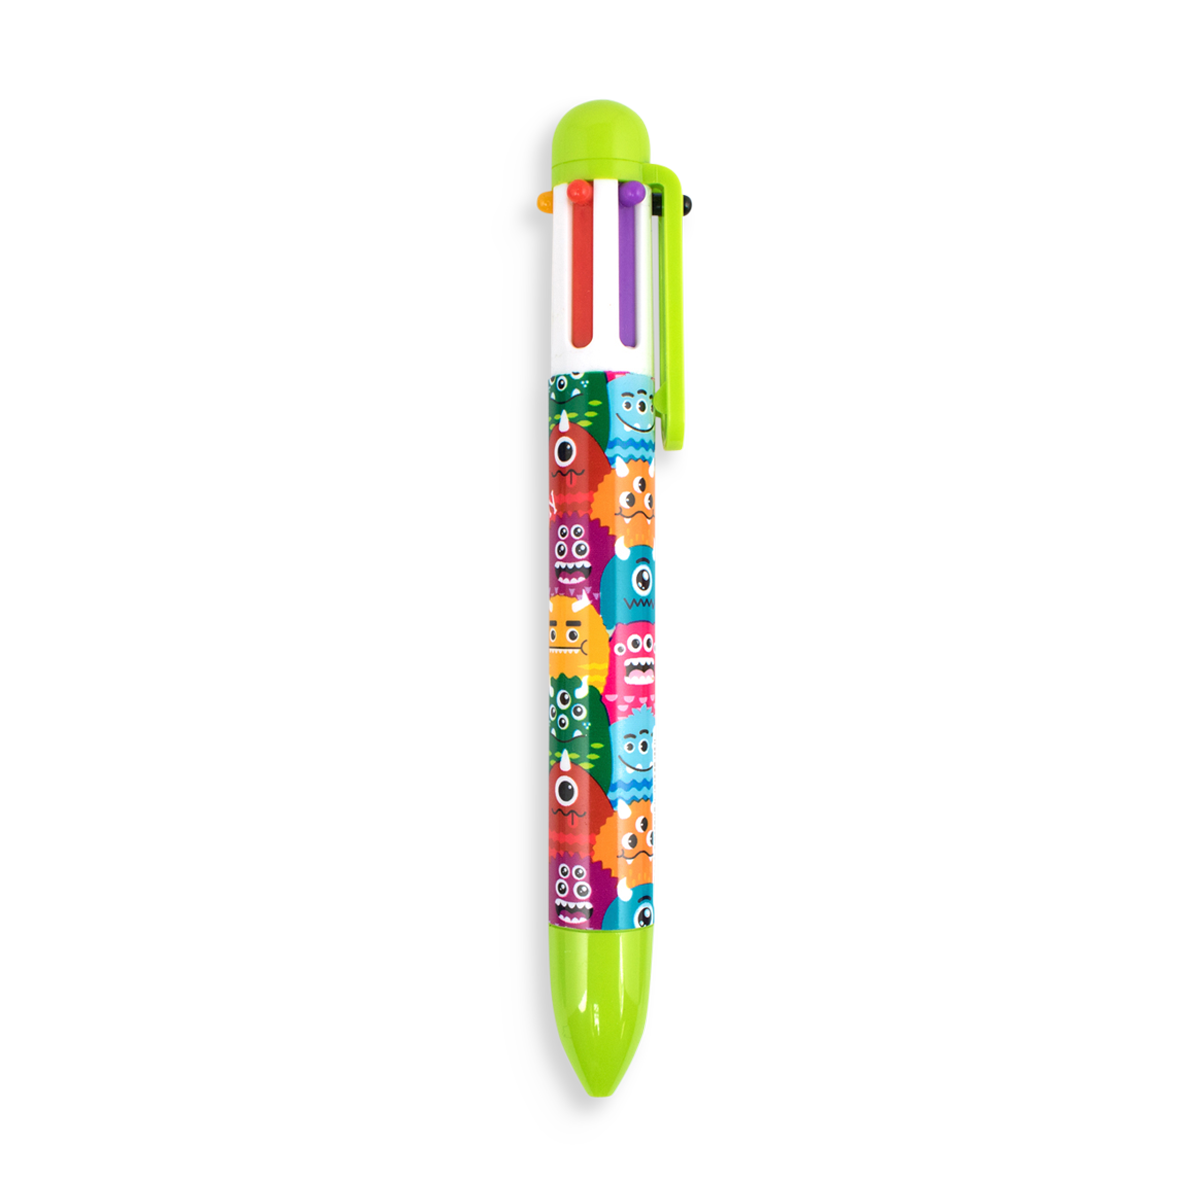 Meanplan 60 Pack 0.5 mm 6 in 1 Multicolor Ballpoint Pen Retractable  Ballpoint Pens Multi Colored Pens in One Cute Candy Color Pens Fun Pens for  Office